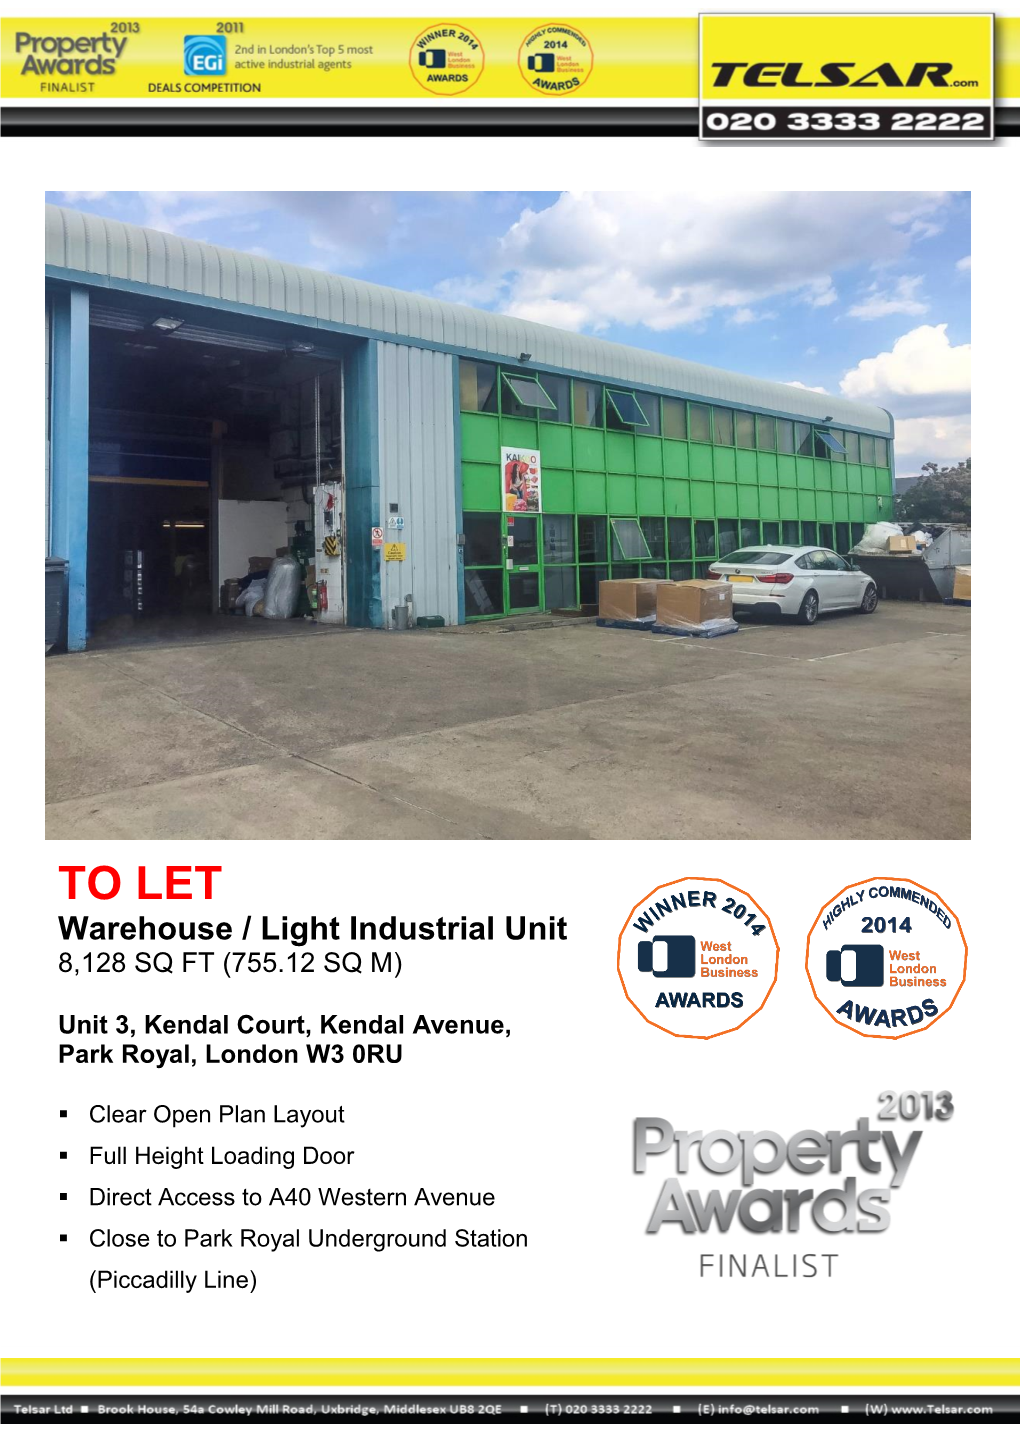 TO LET Warehouse / Light Industrial Unit 8,128 SQ FT (755.12 SQ M)